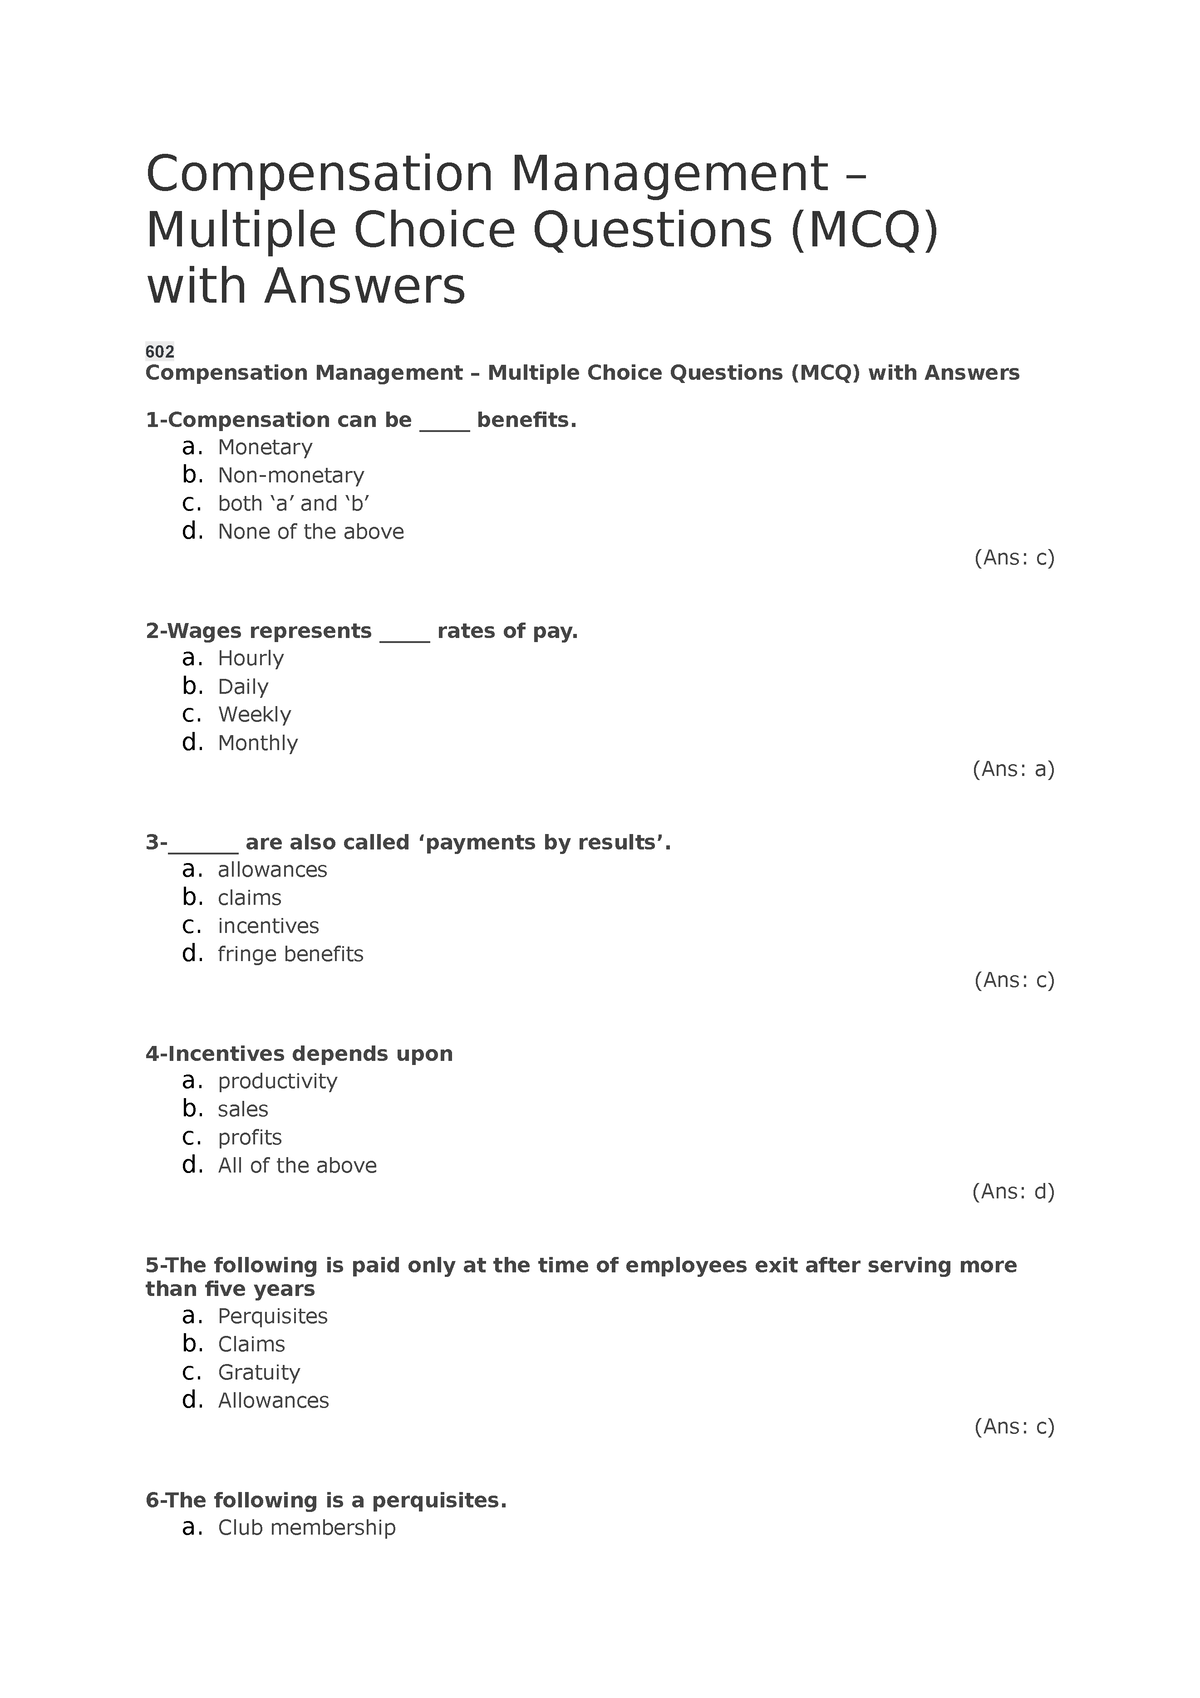 mcq questions on assignment problem